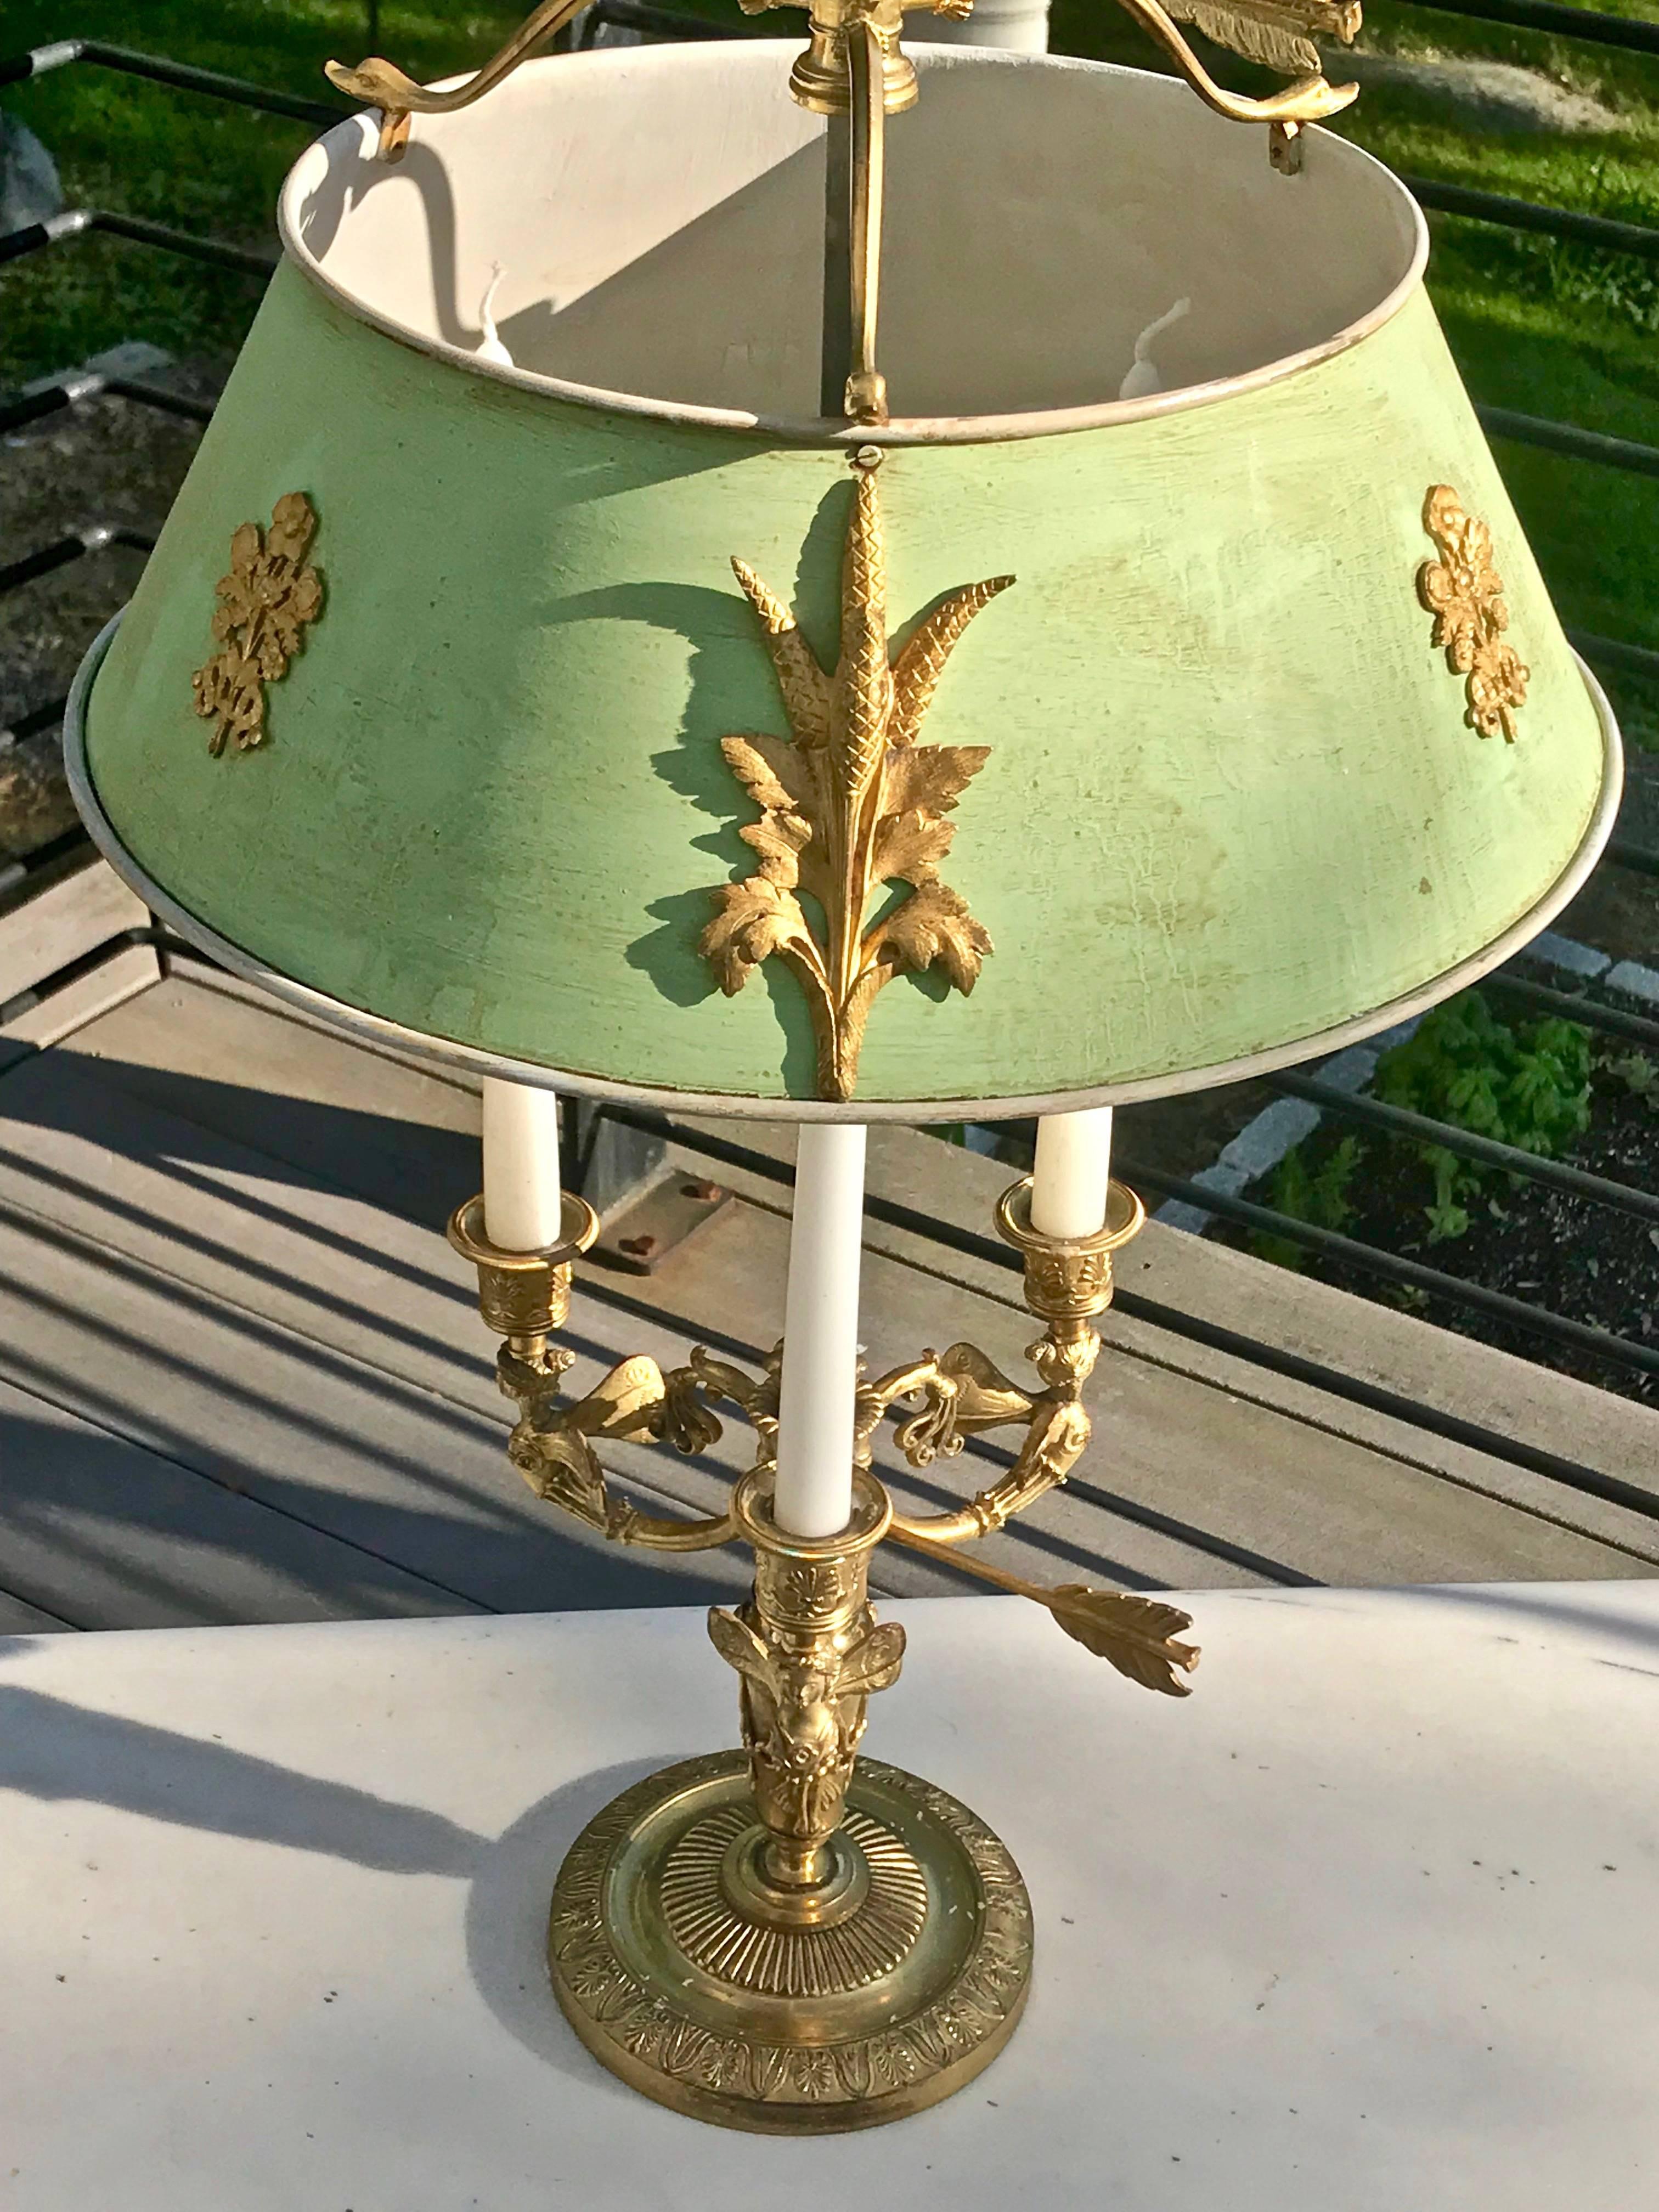 Incredible 19th century Russian Bouillotte lamp with ormolu fittings

--Winged Victory Finial
--Light green tole shade
--Zephyr motif
--Arrow to adjust heights
--Gilt bronze throughout

Ex Collection Middlebury College, VT.
  